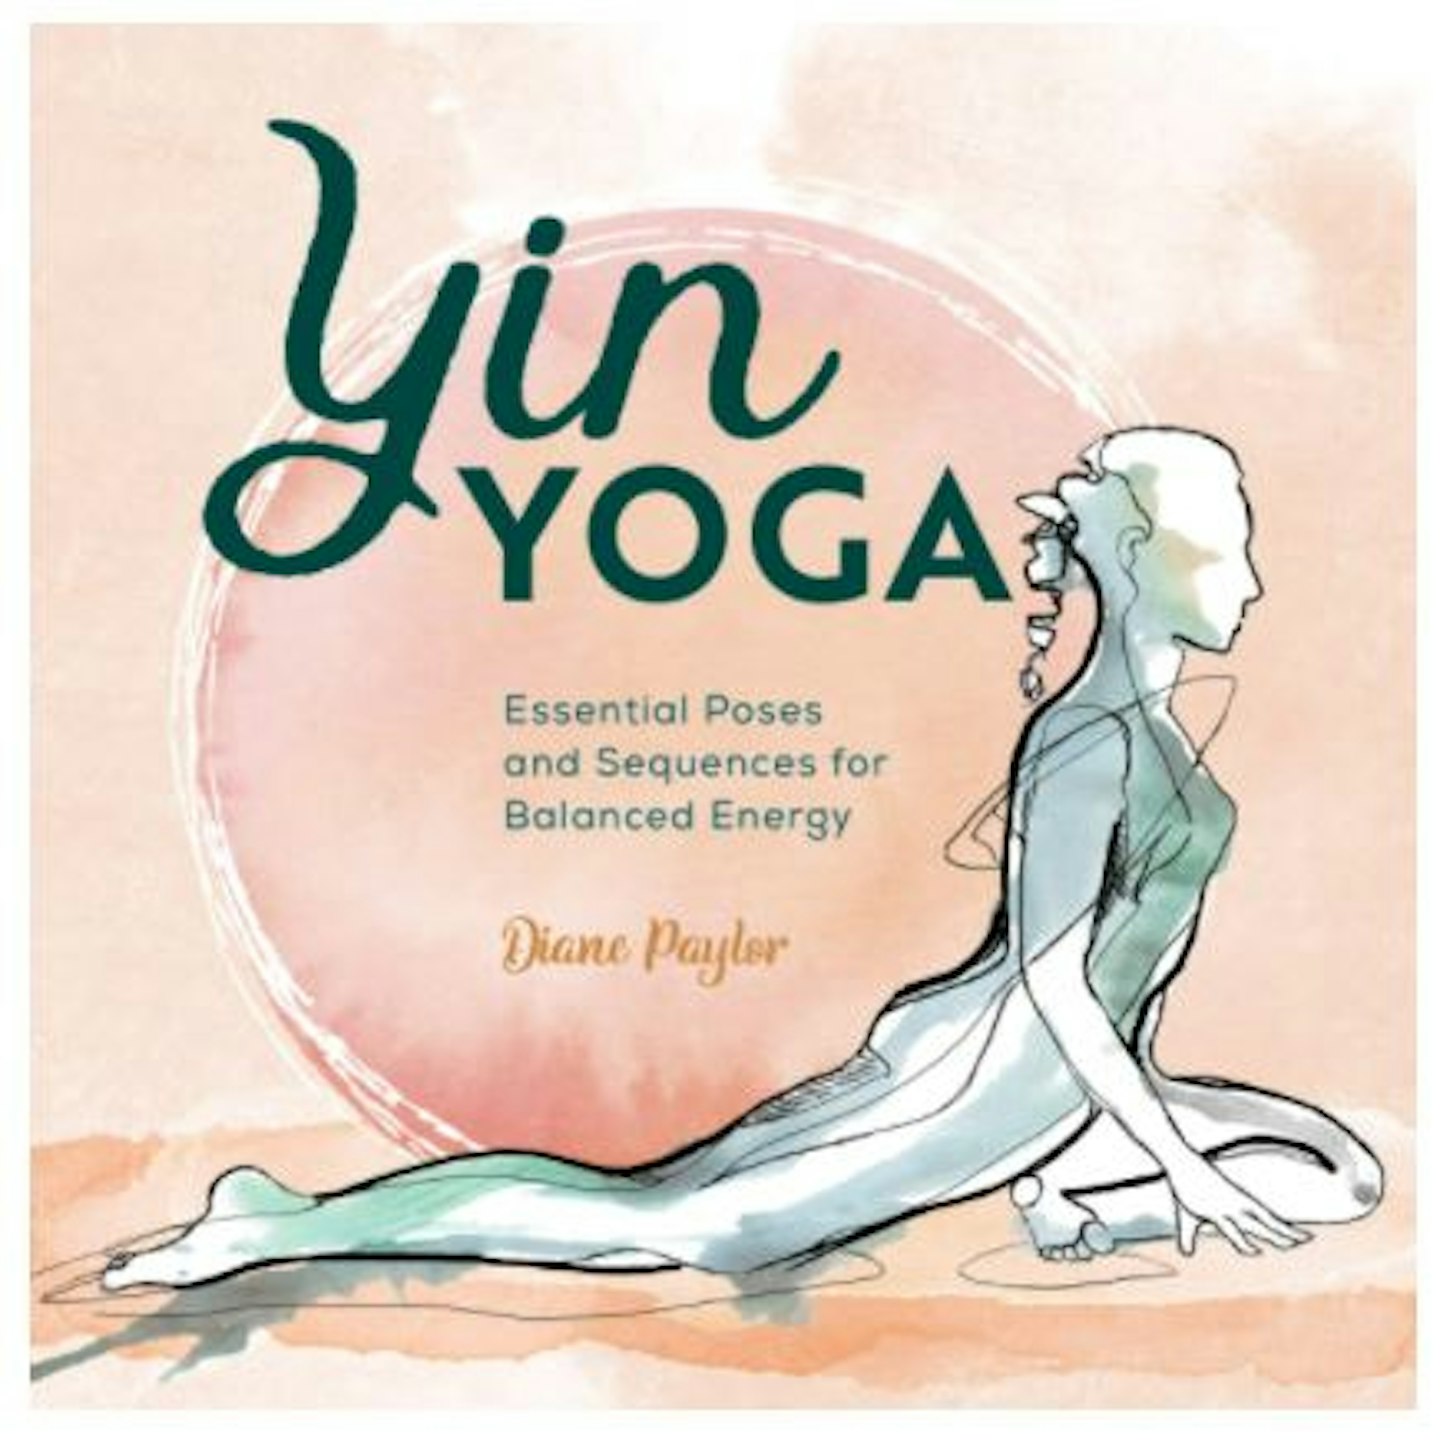 Yin Yoga: Essential Poses and Sequences for Balanced Energy u2013 Diane Paylor